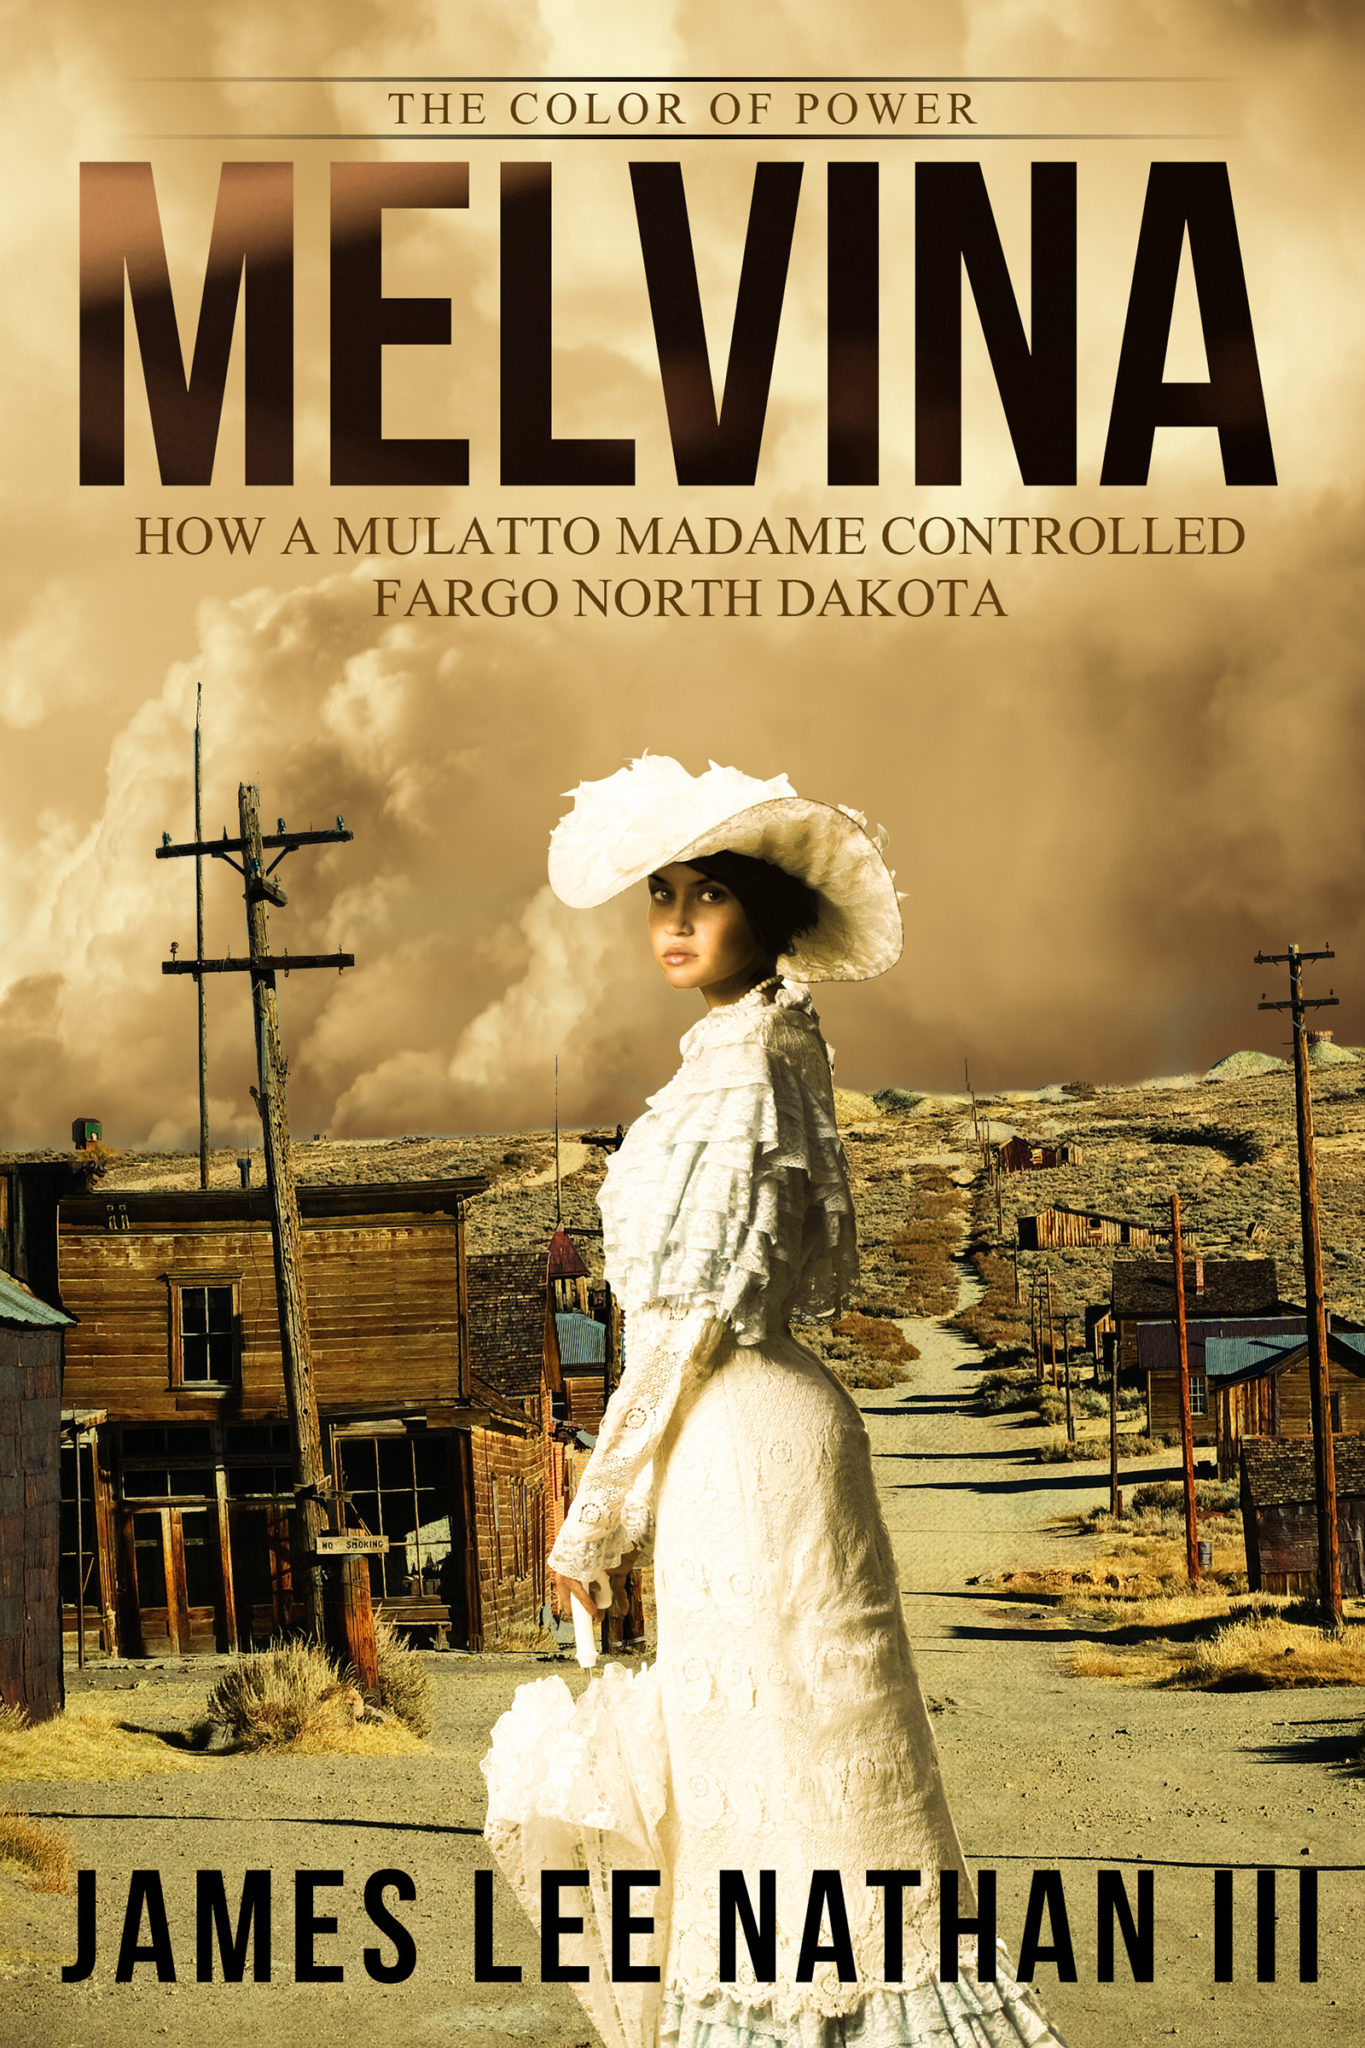 Melvina The Color of Power by James Lee Nathan III